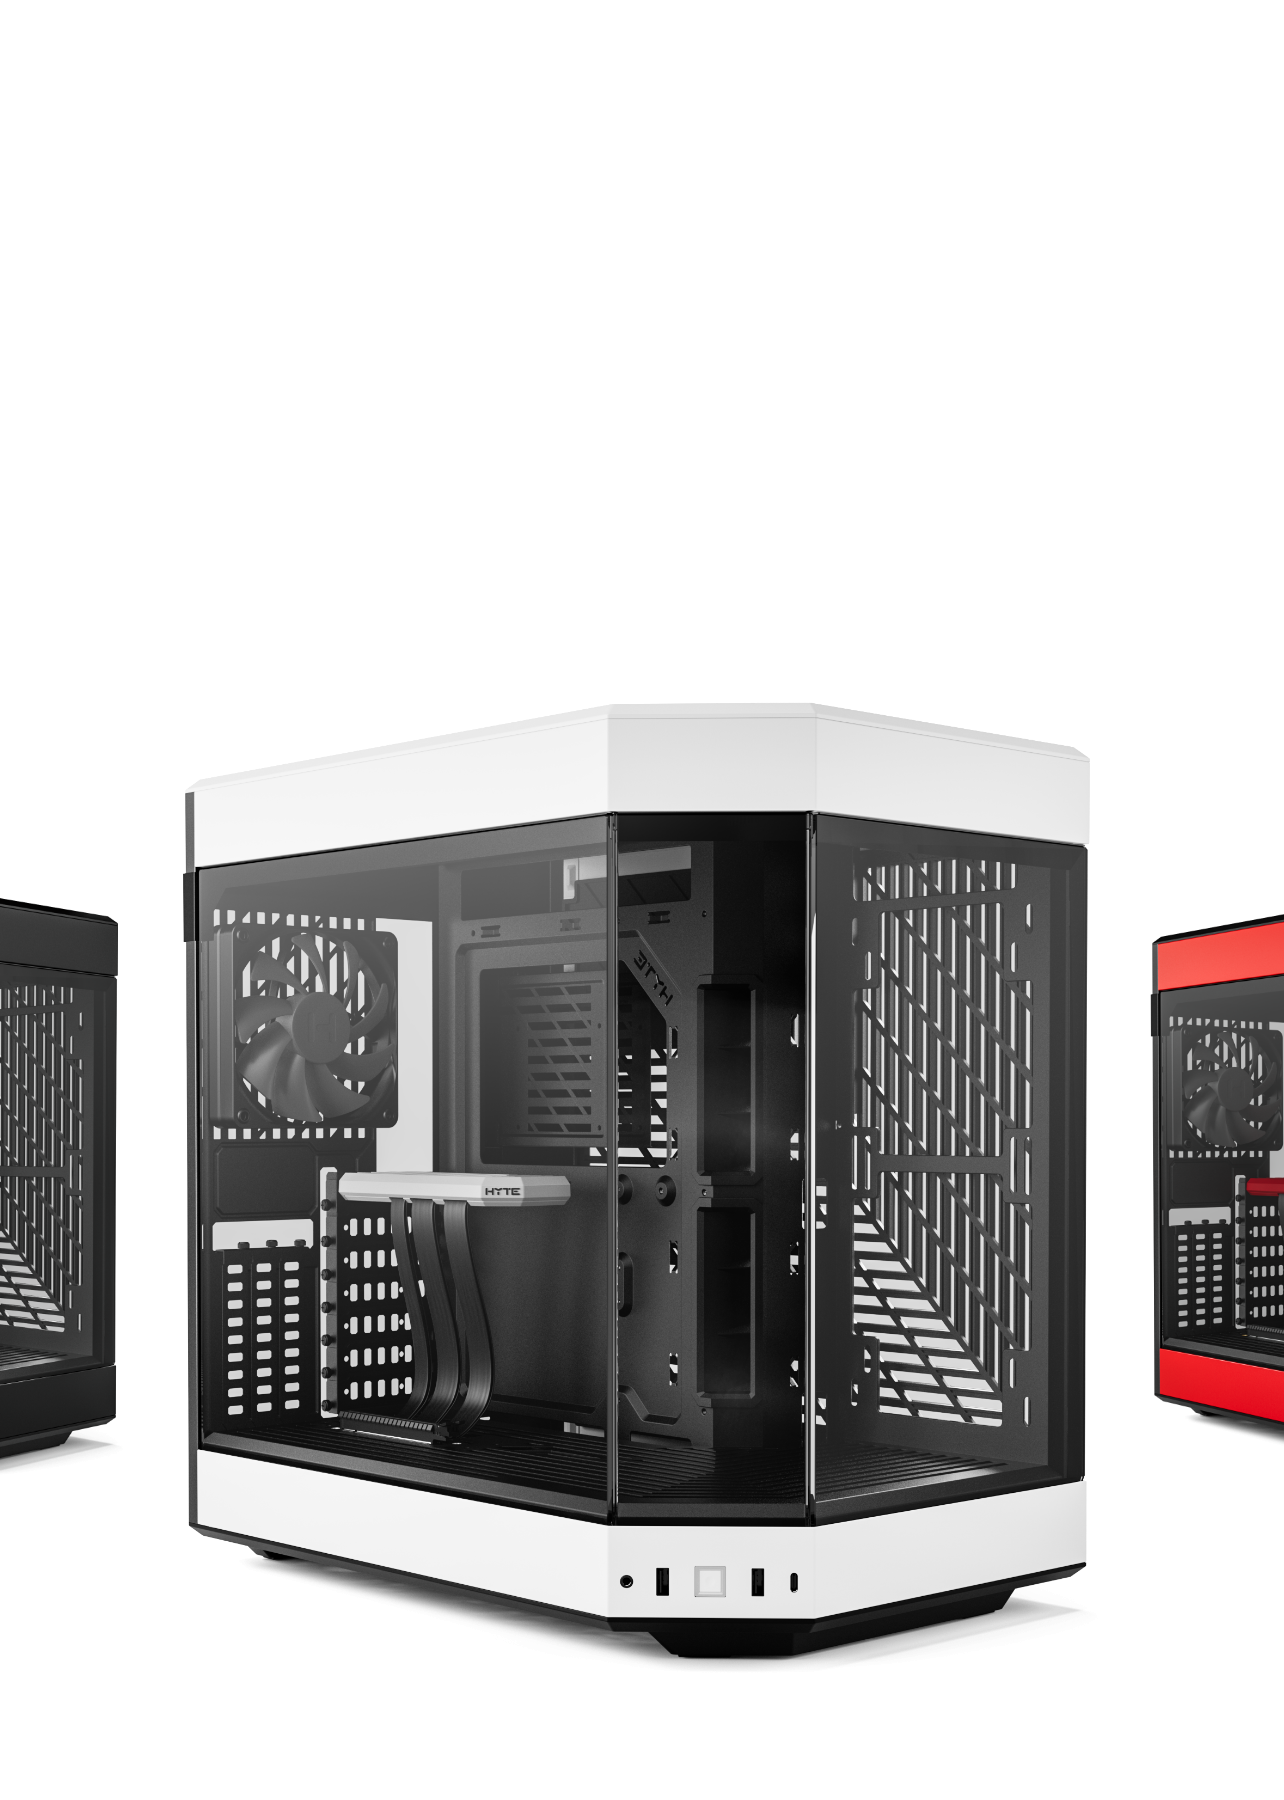 aflevere snap Stor mængde HYTE: PC Cases, Components, Parts, and Accessories | HYTE